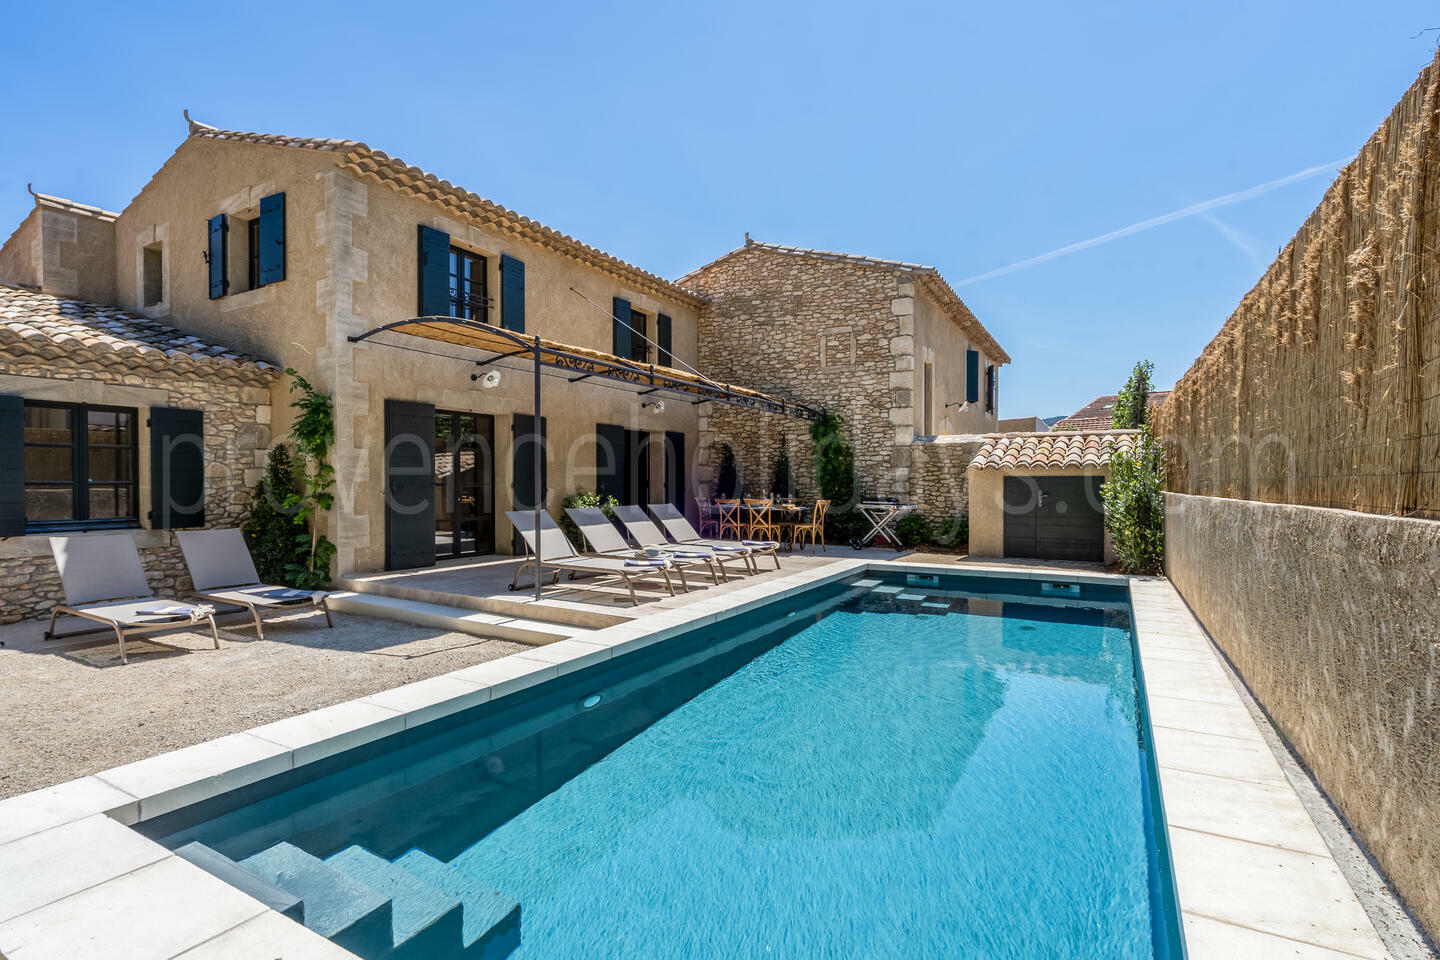 Fully-Renovated Holiday Rental with Private Pool in Eygalières Maison des Amandes: Villa - 1